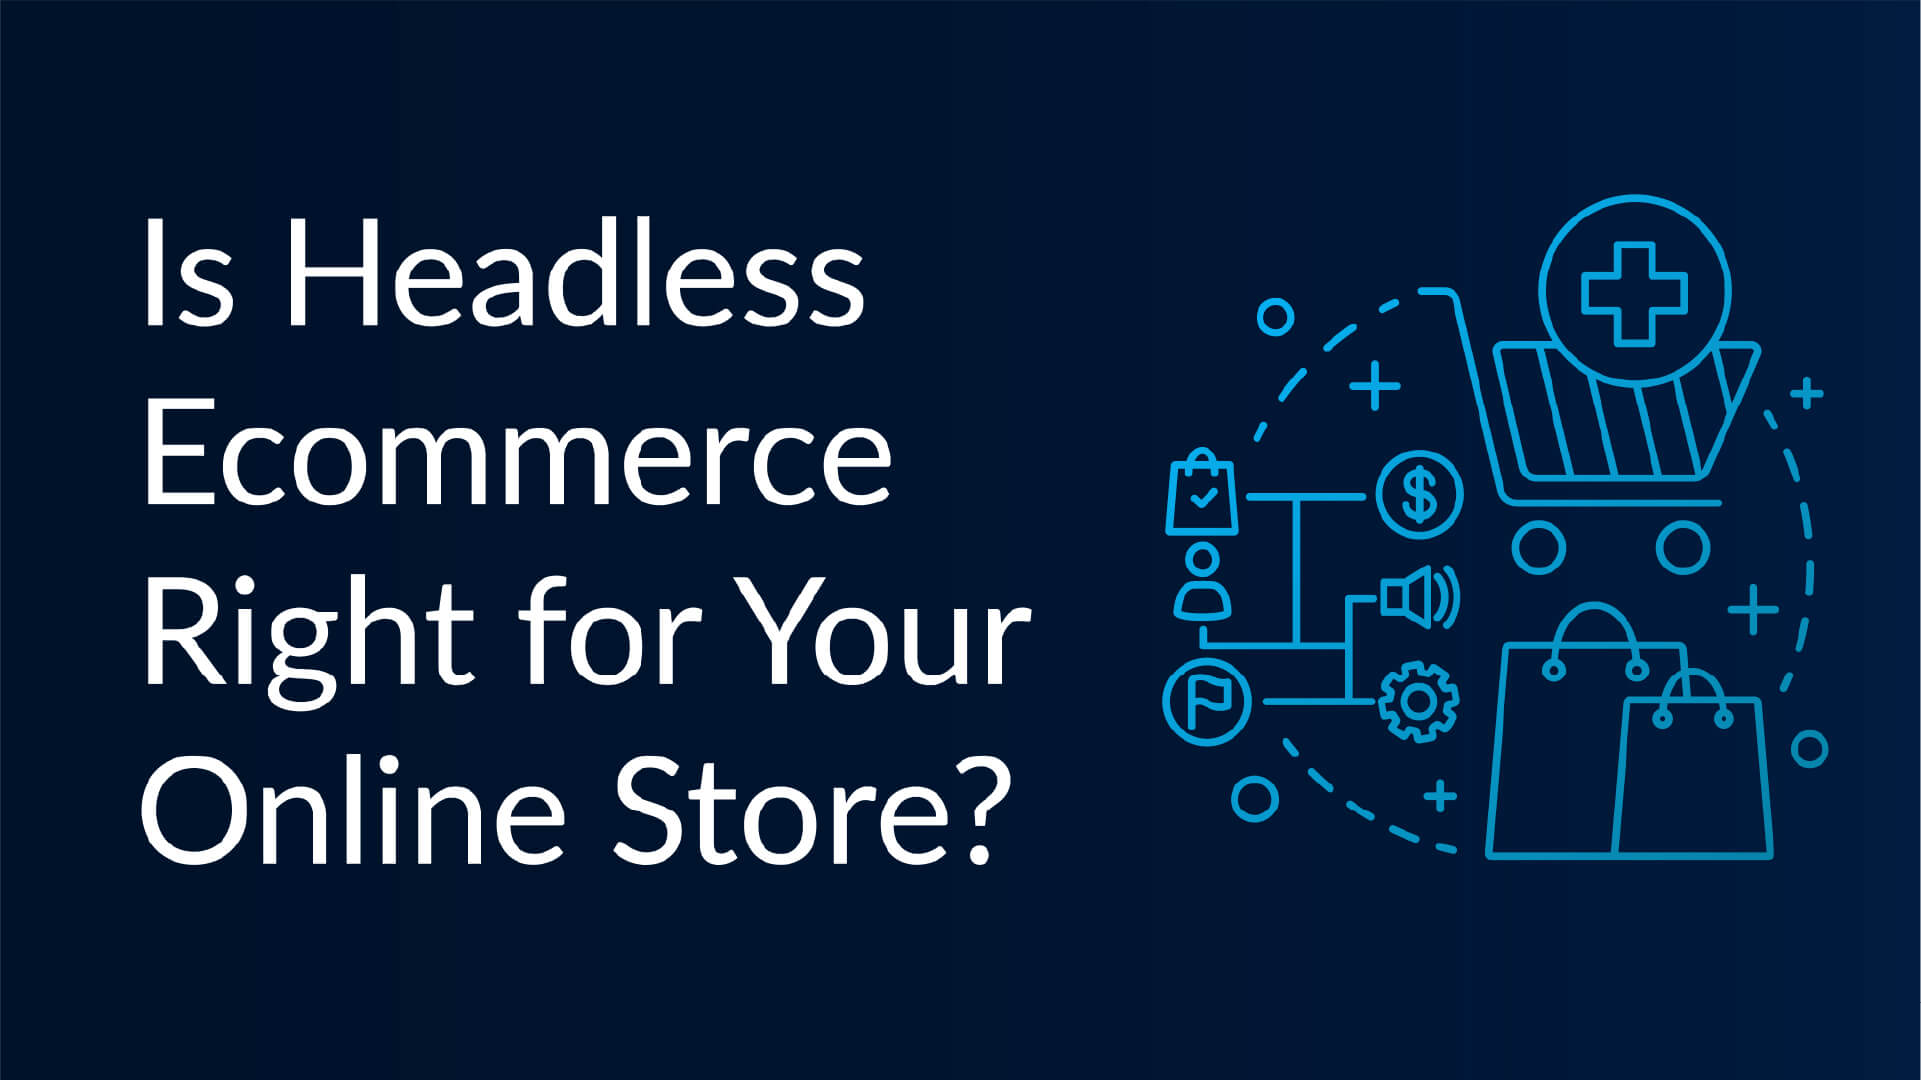 shuup - is headless ecommerce right for your store